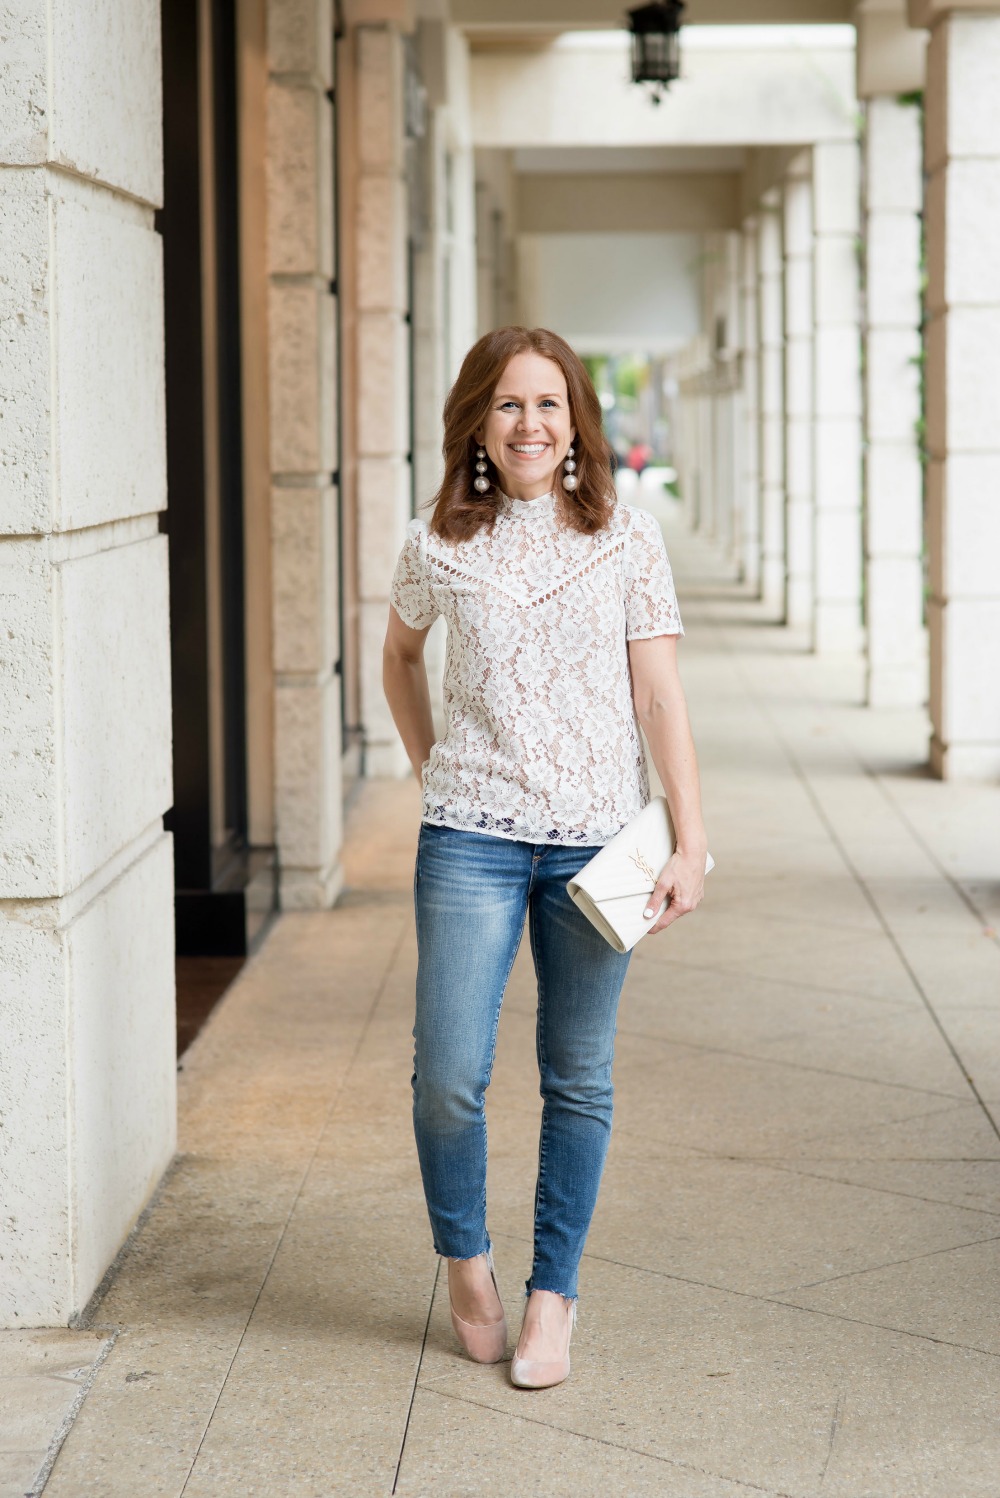 Classic outfit: lace blouse, blue denim and blush heels // the modern savvy